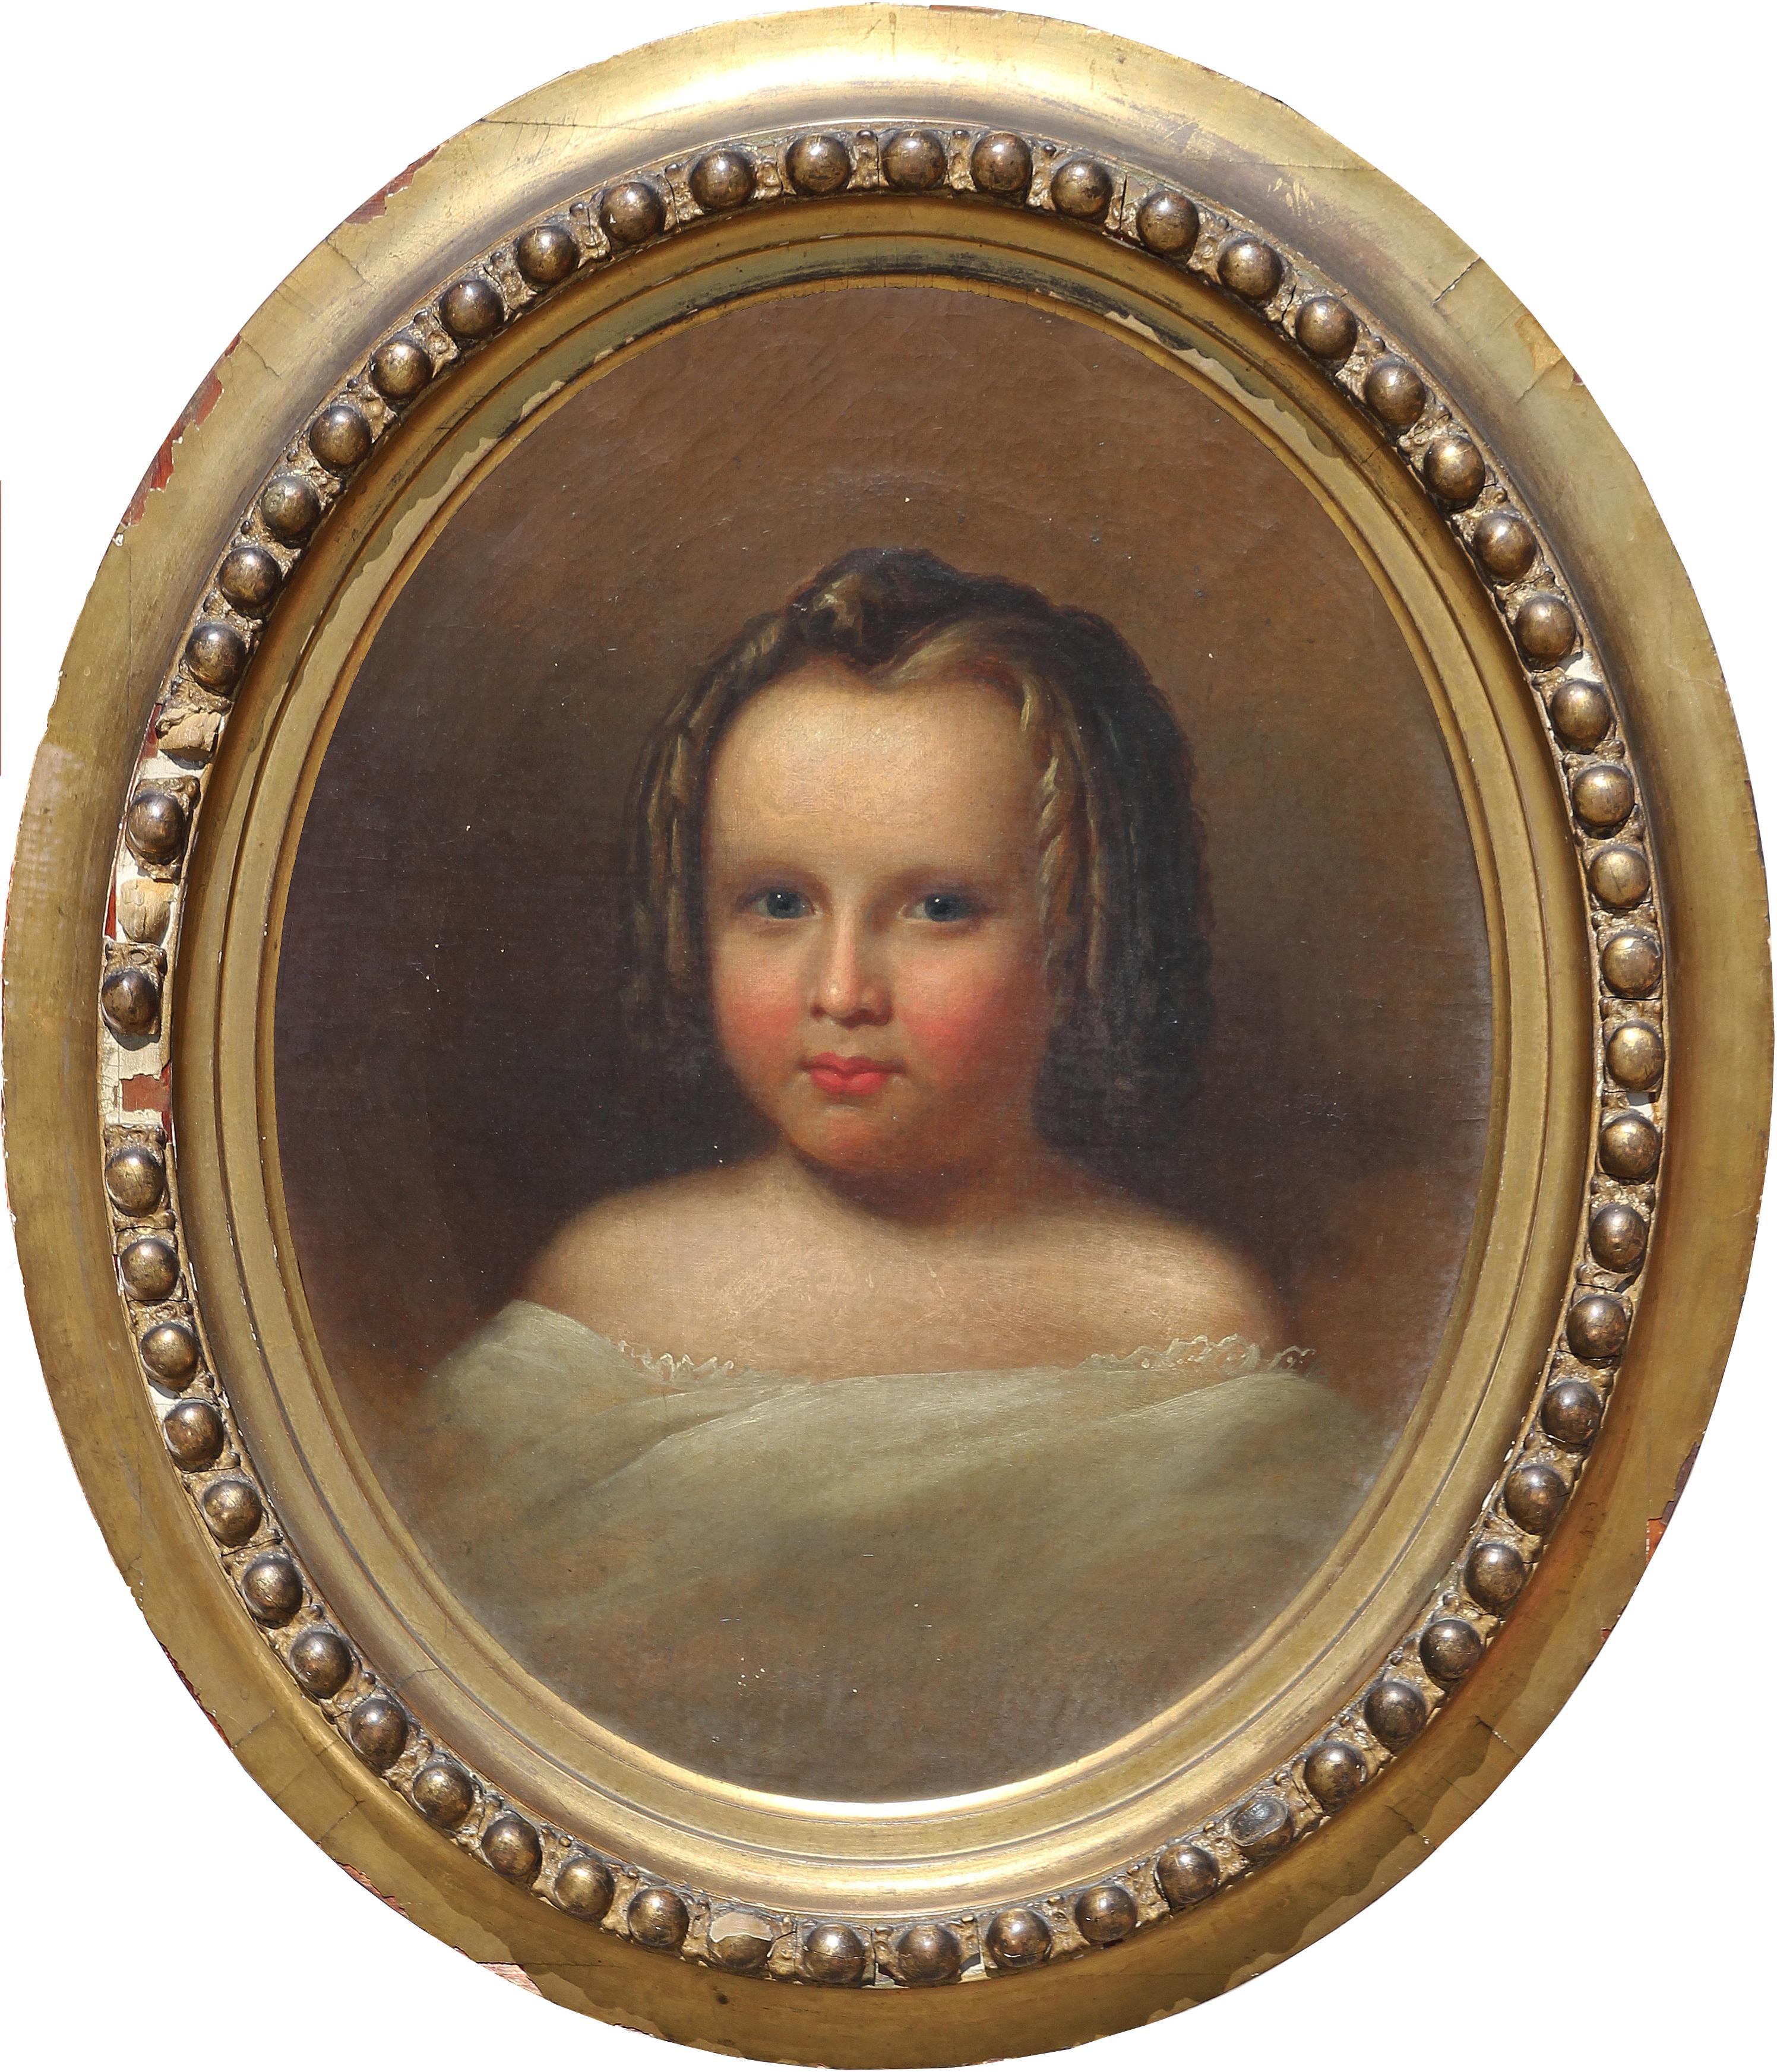 Unknown Portrait Painting - Antique Oval Realistic Portrait of a Young Lady